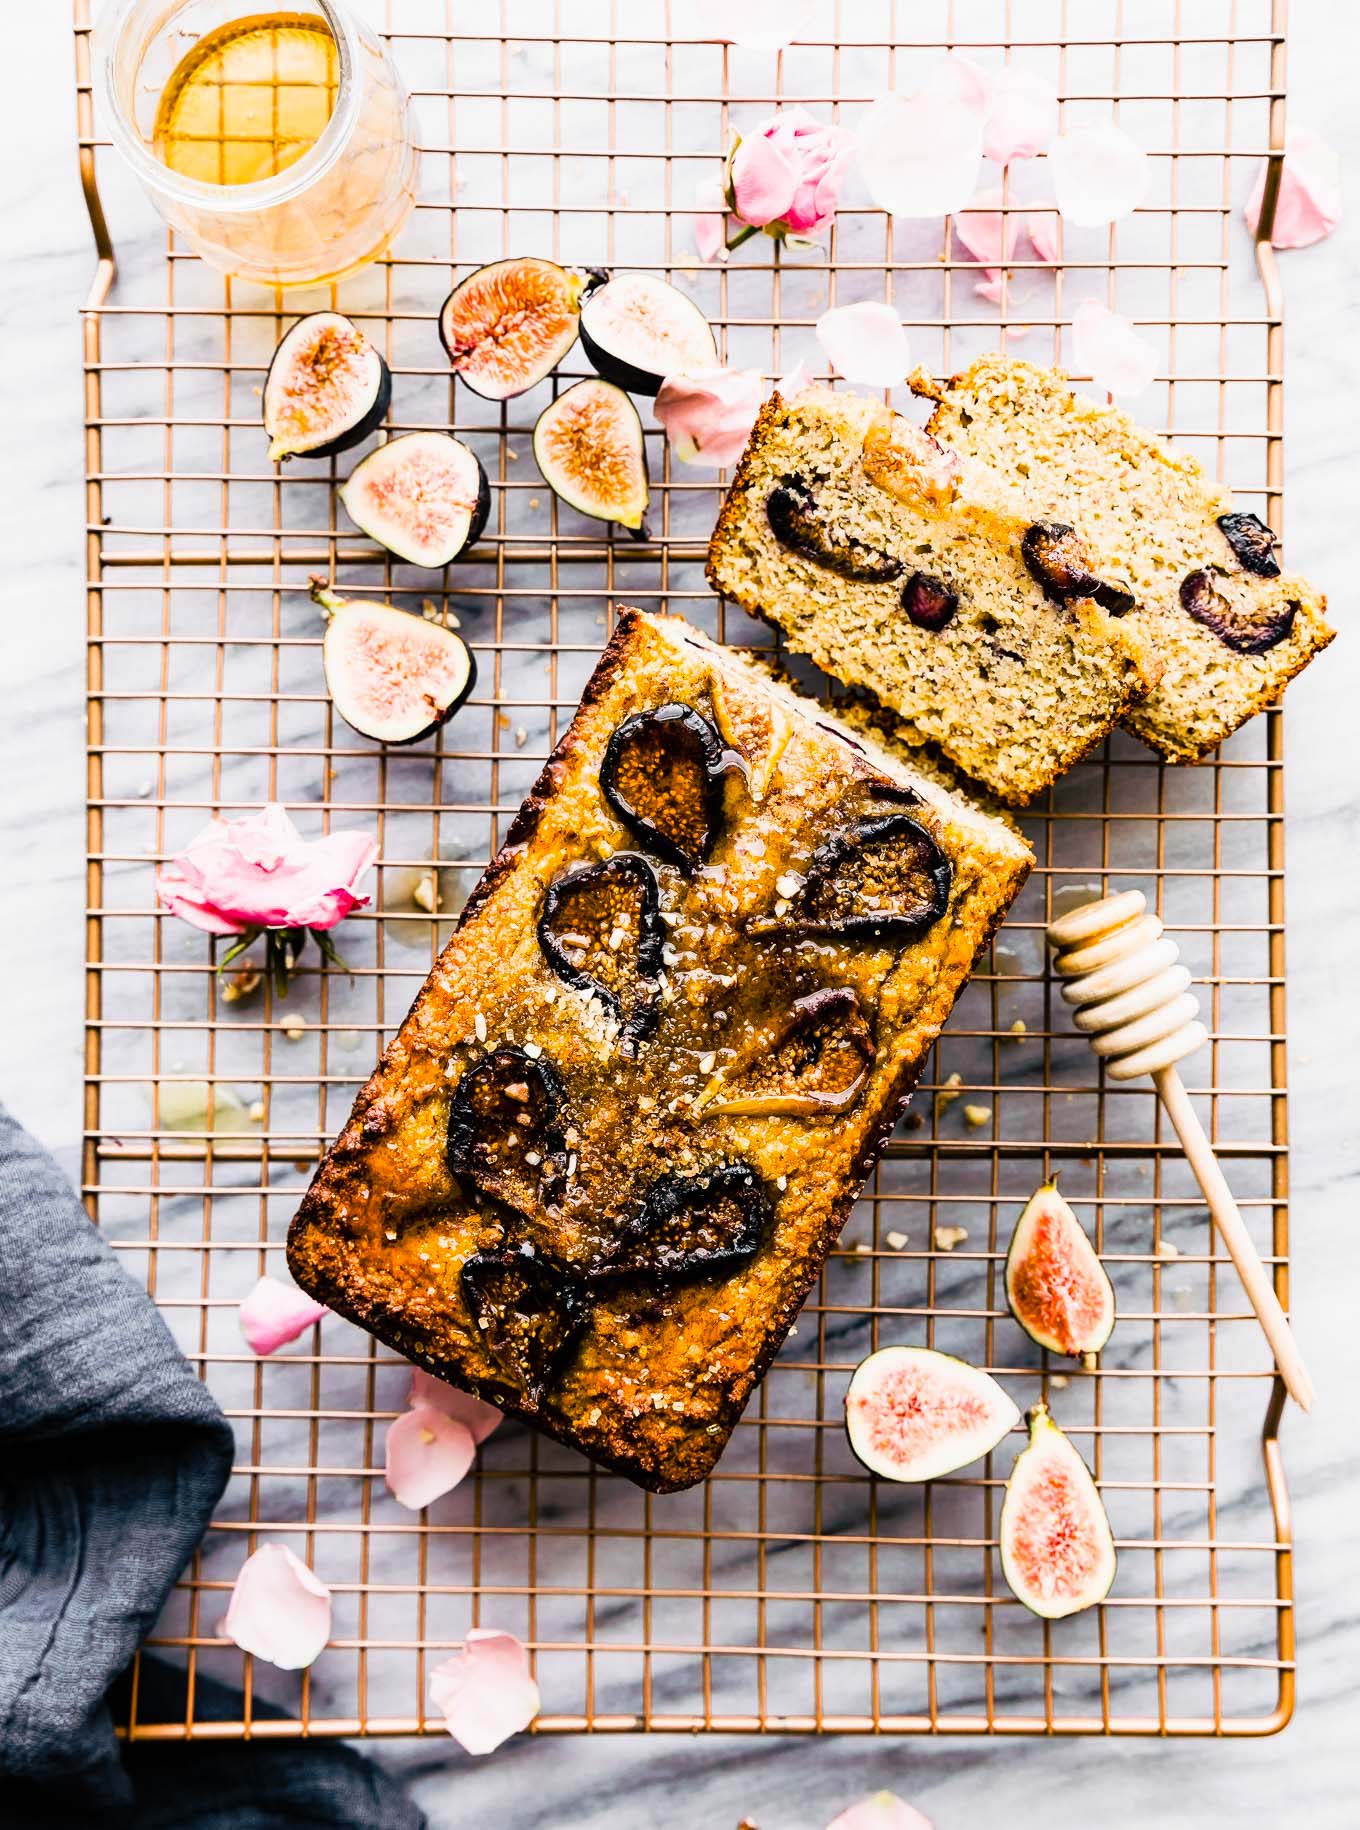 Almond flour loaf cake with honey roasted figs baked into top, on cutting board with two thick slices cut from loaf.